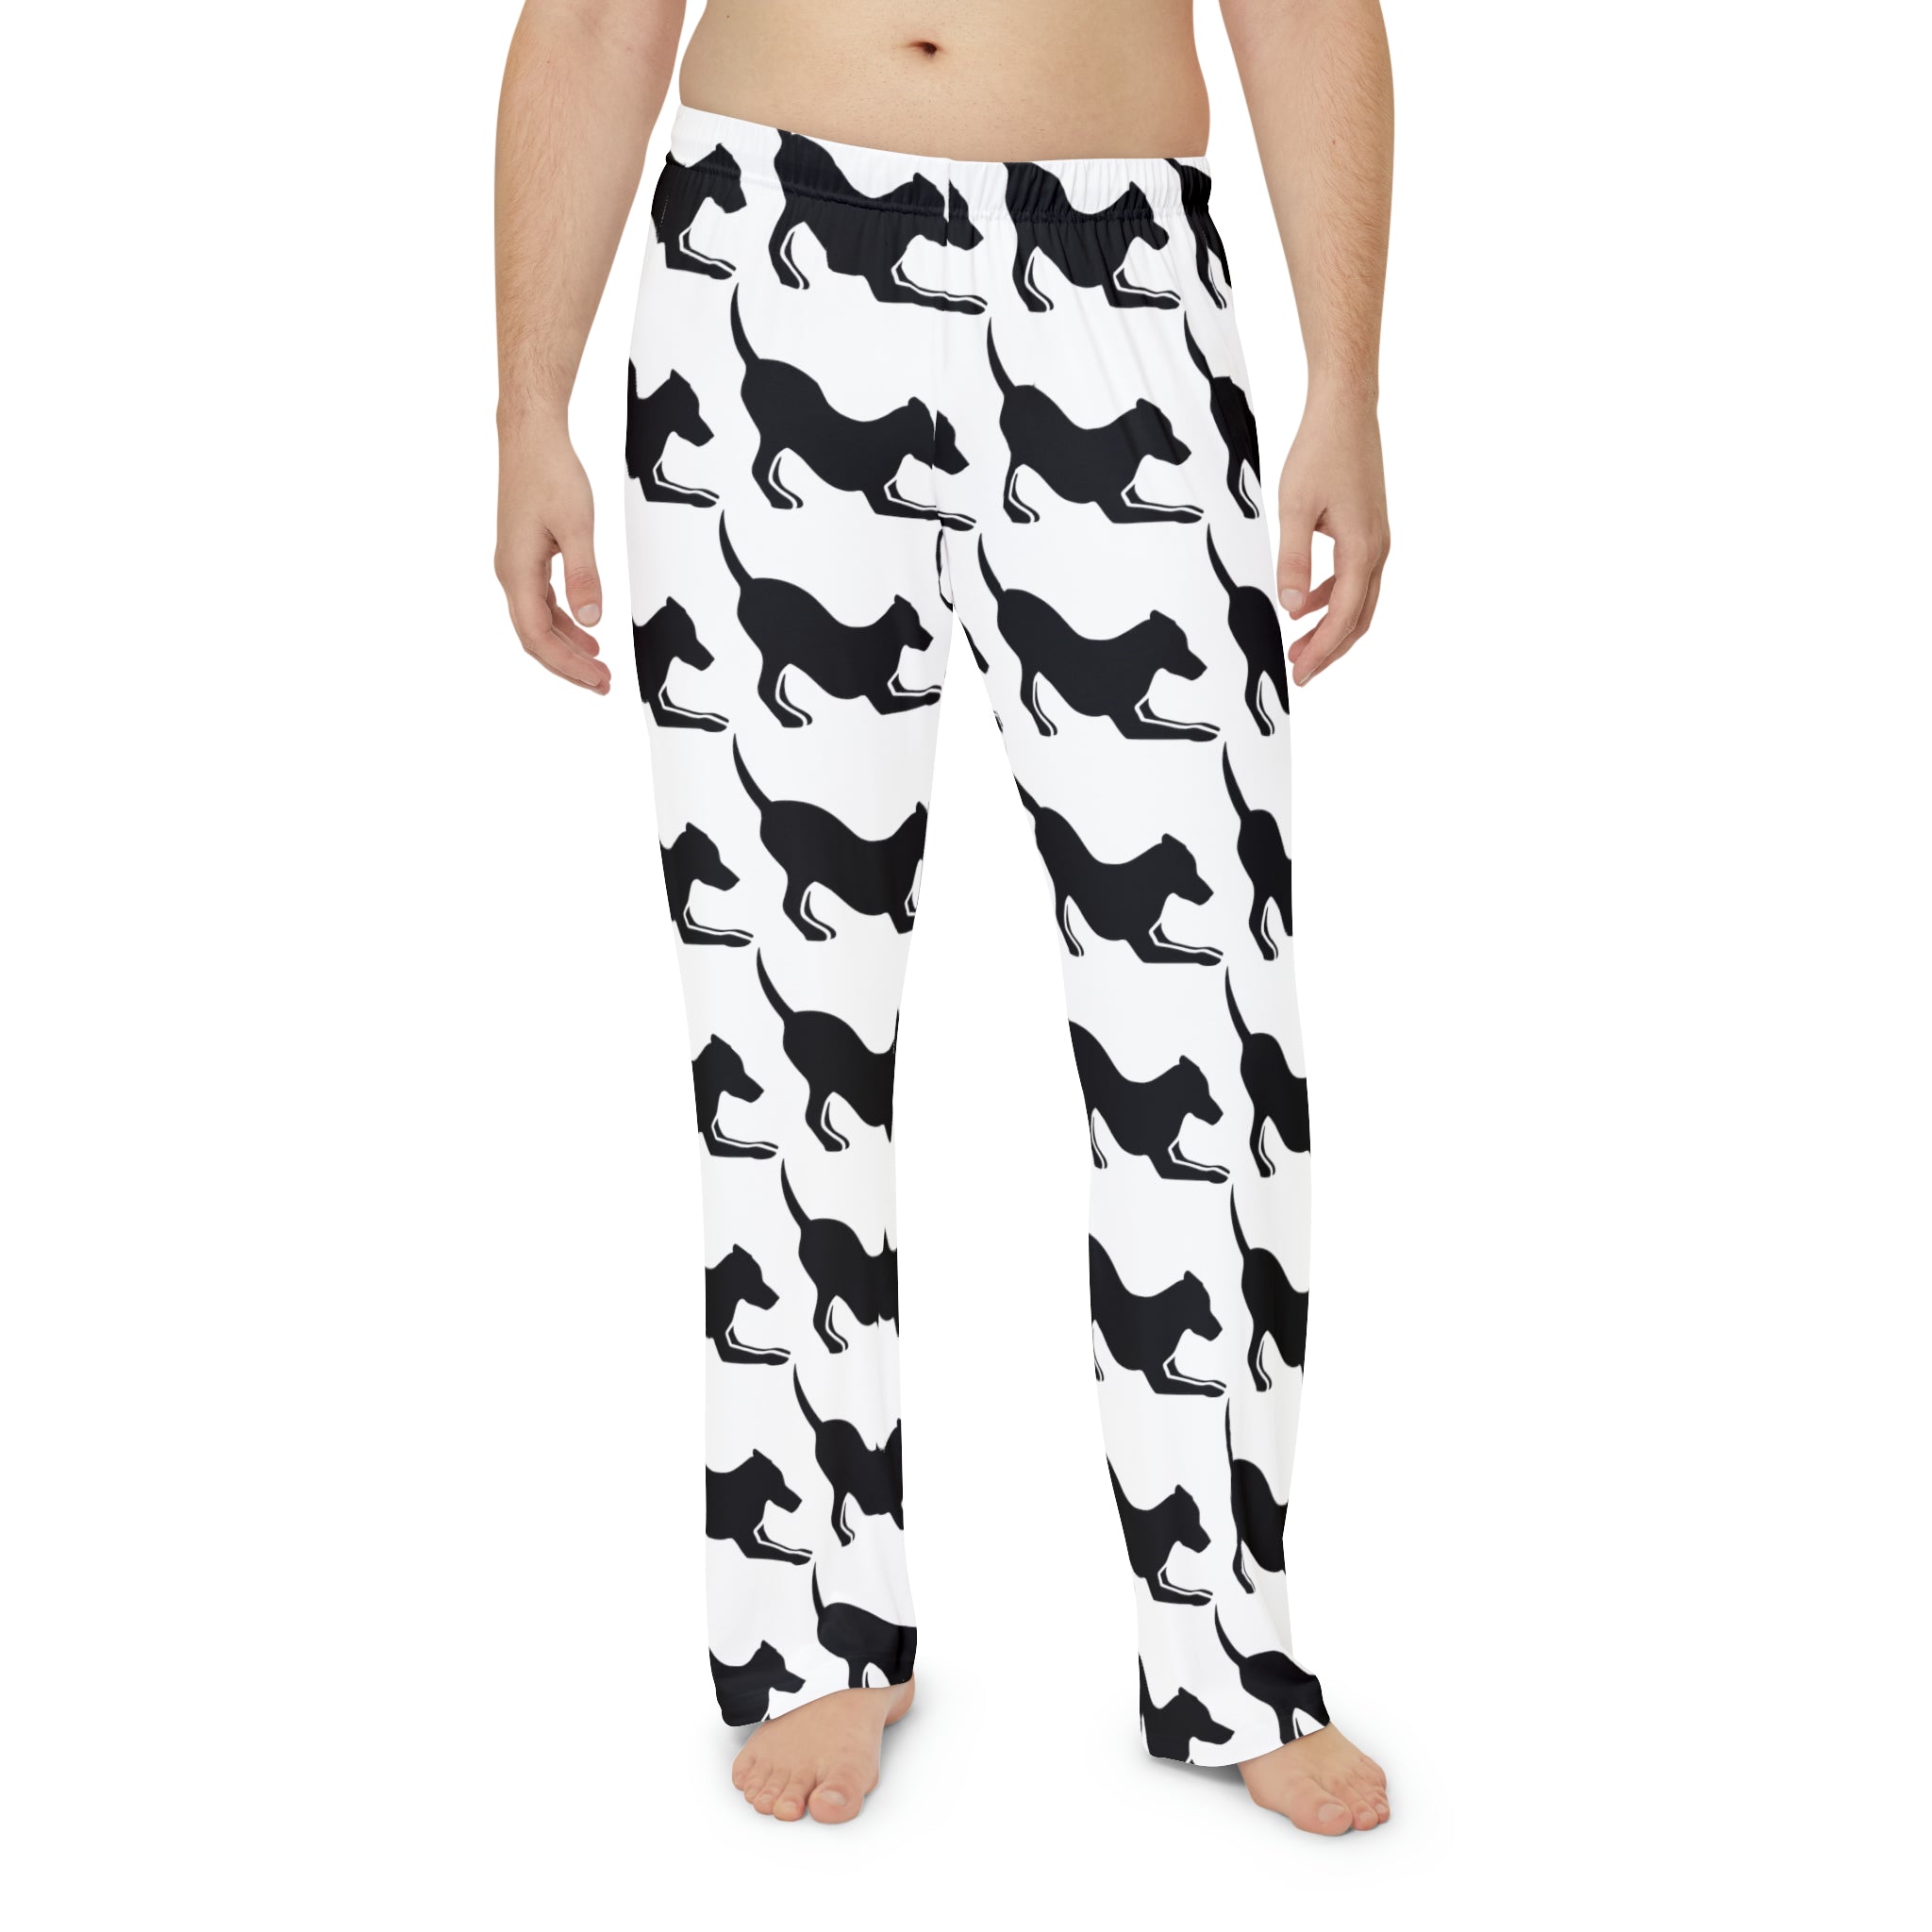 Men's Tailwags Pajama Pants - TAILWAGS UNLIMITED